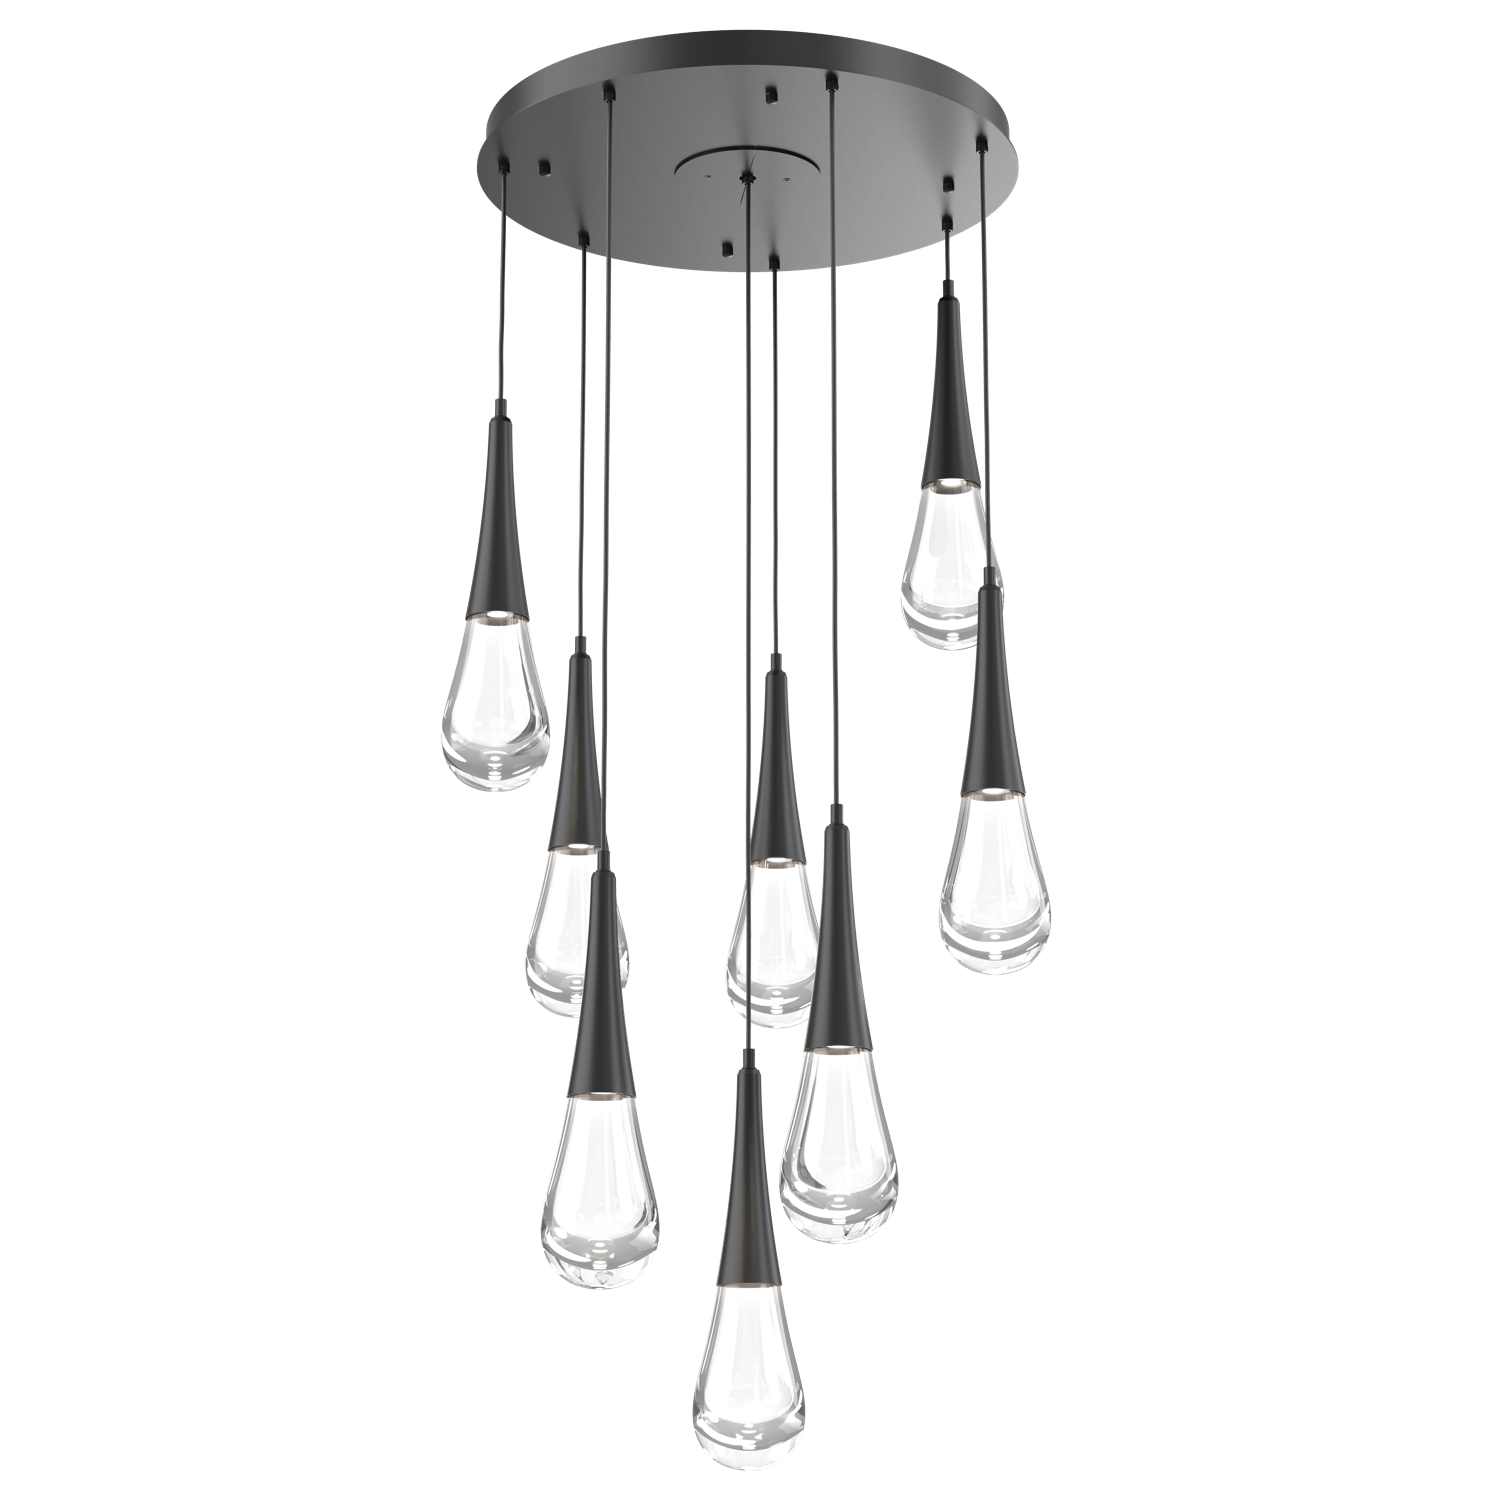 CHB0078-08-MB-Hammerton-Studio-Raindrop-8-light-round-pendant-chandelier-with-matte-black-finish-and-clear-blown-glass-shades-and-LED-lamping